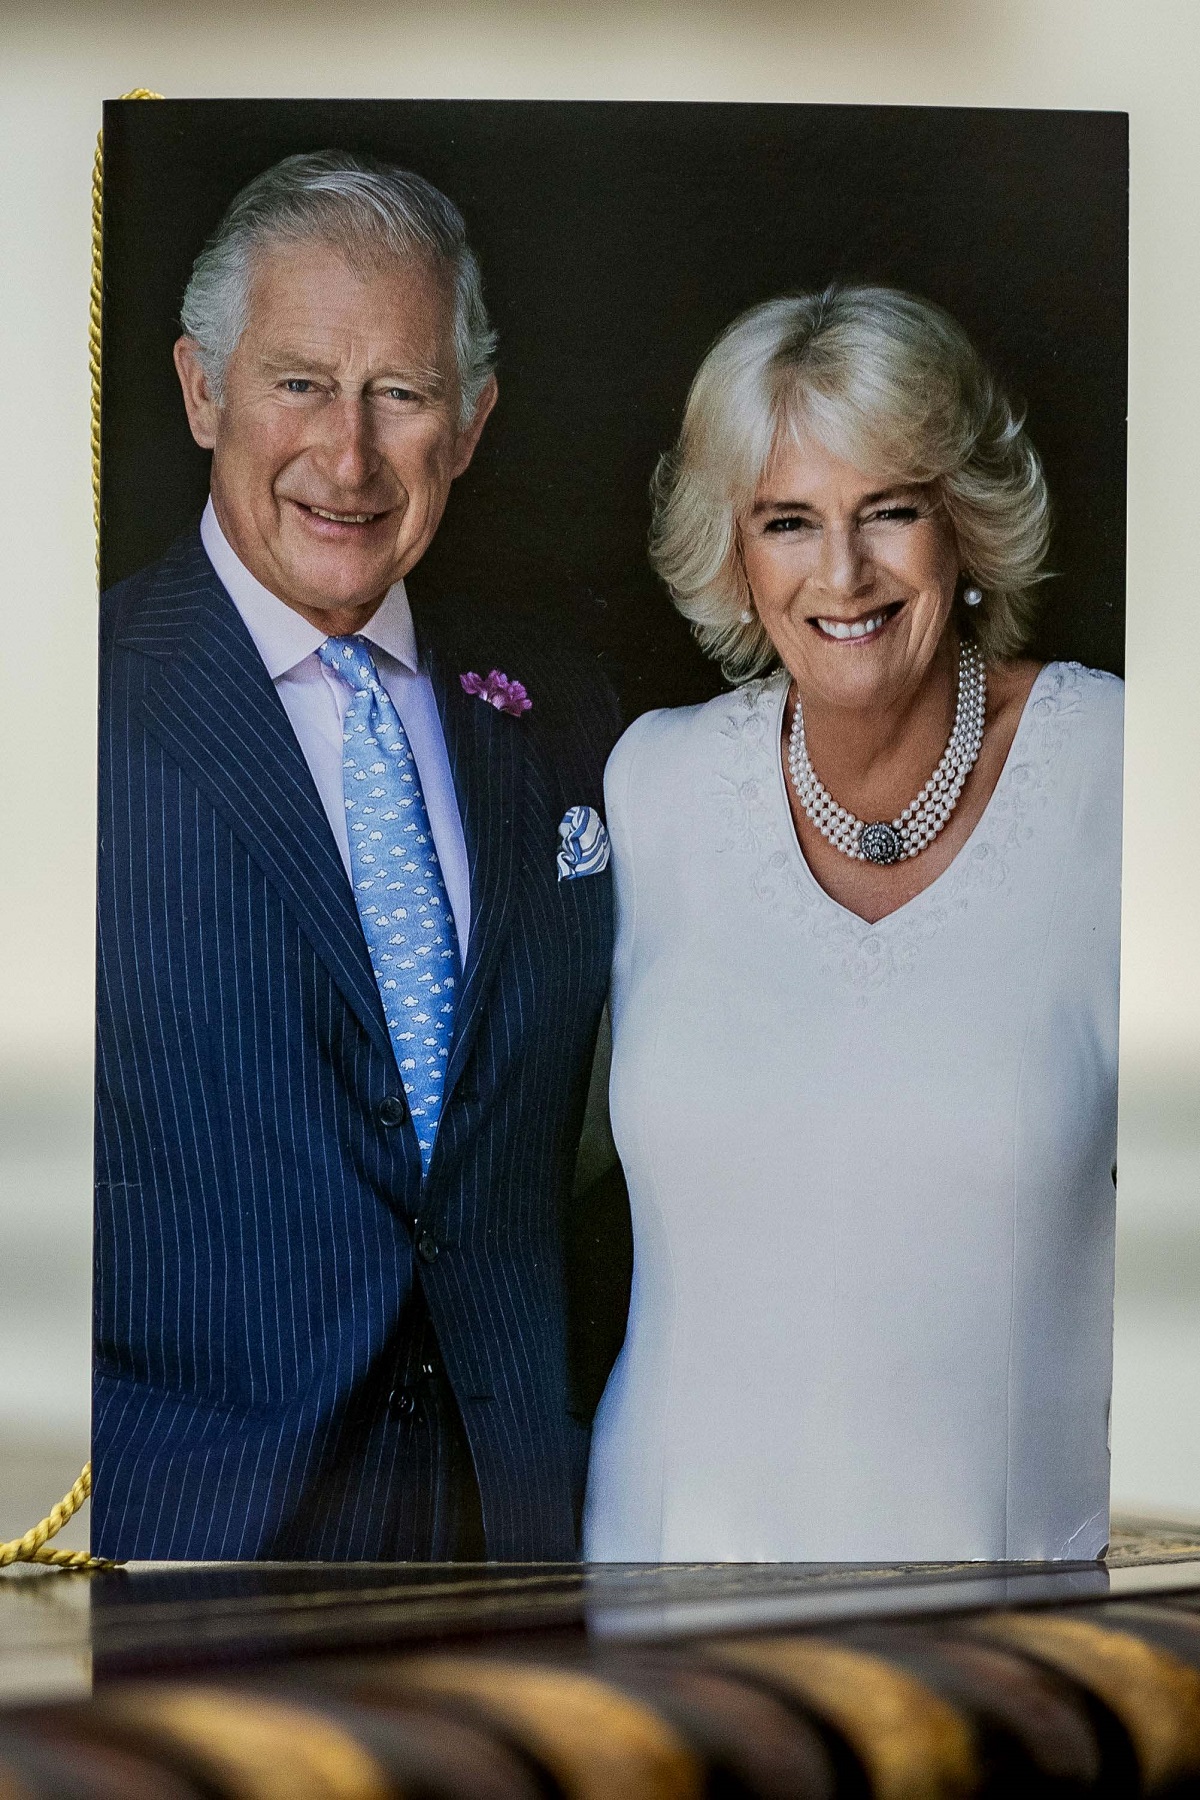 A close-up of the front of one of the first birthday cards celebrating 100 years of age, which have been signed by King Charles III and Camilla Parker Bowles